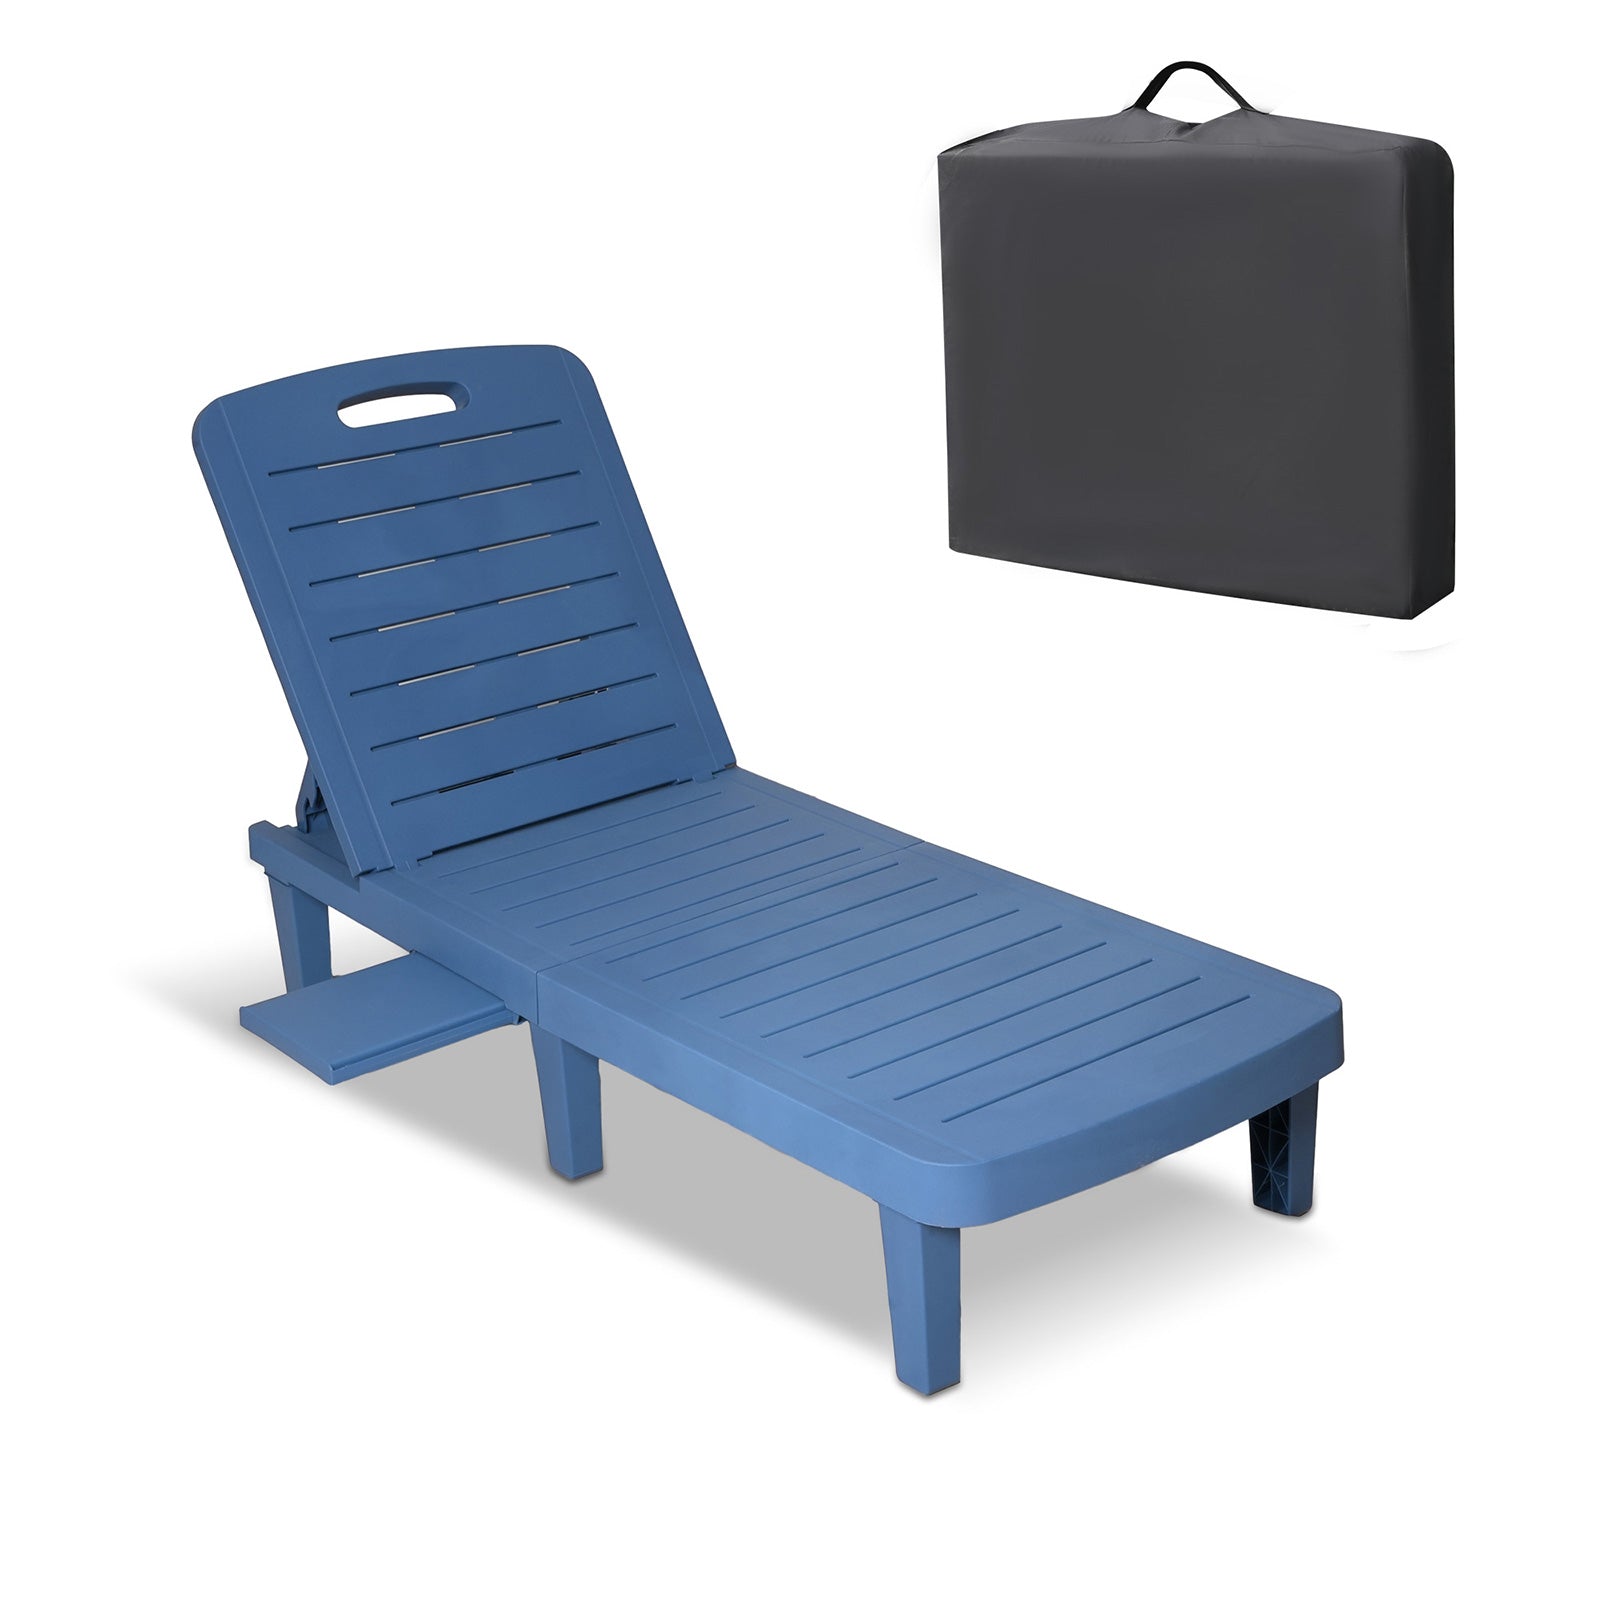 Chaise Lounge Chair Patio Sunbathing Chair with 4 Level Adjustable Backrest & Hide Cup Holder, Blue